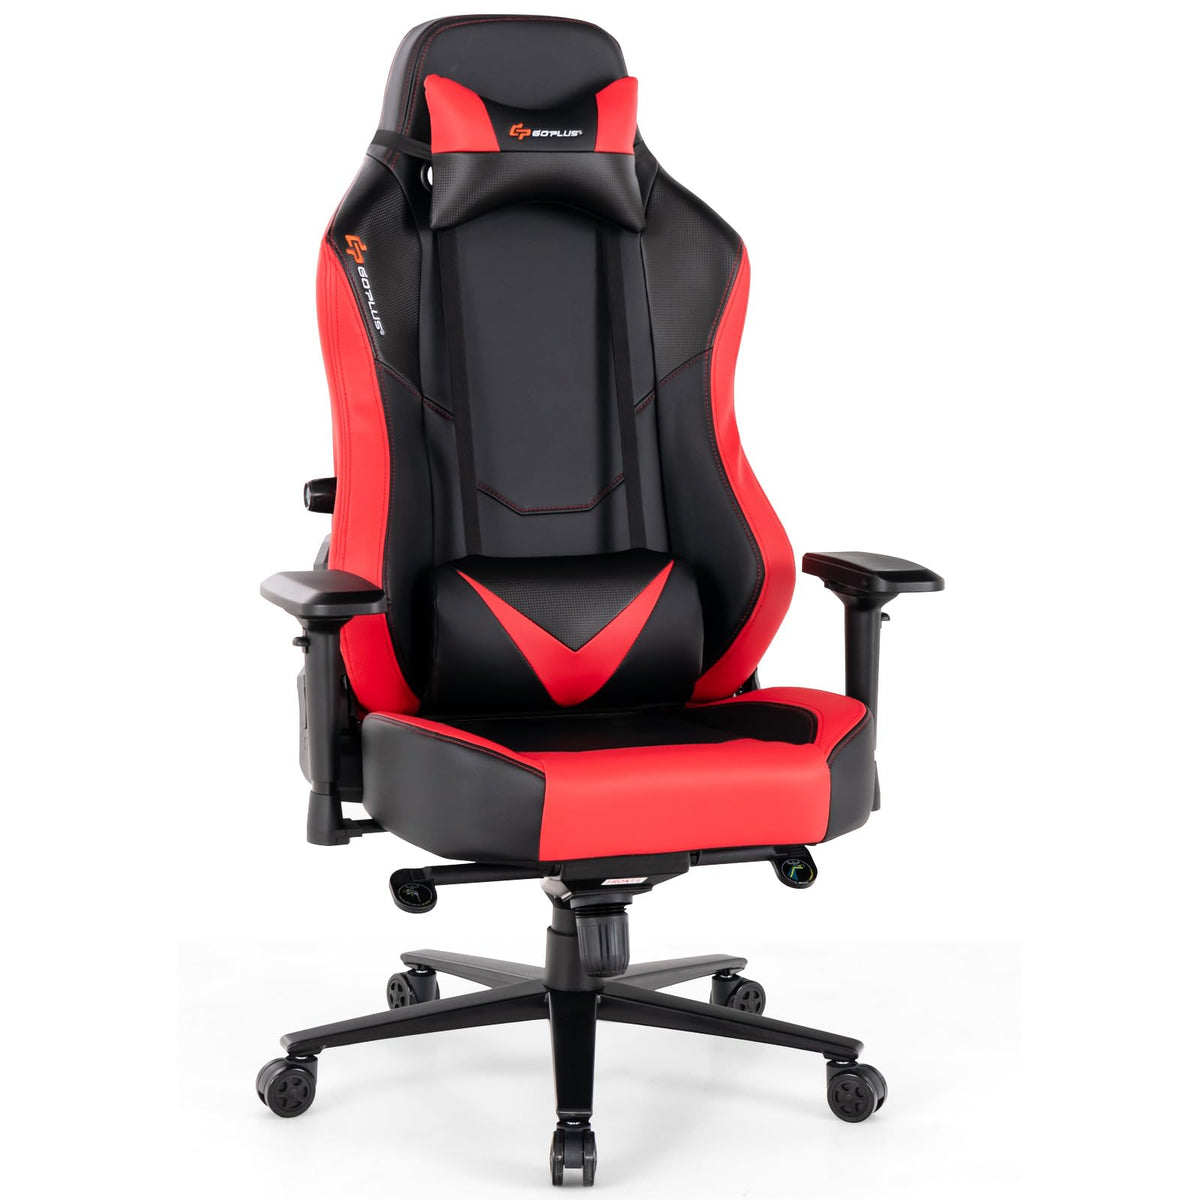 Goplus Gaming Chair, 360° Swivel Computer Chair with Casters, Multi-Angle Reclining, Tension Control, 4D Armrest